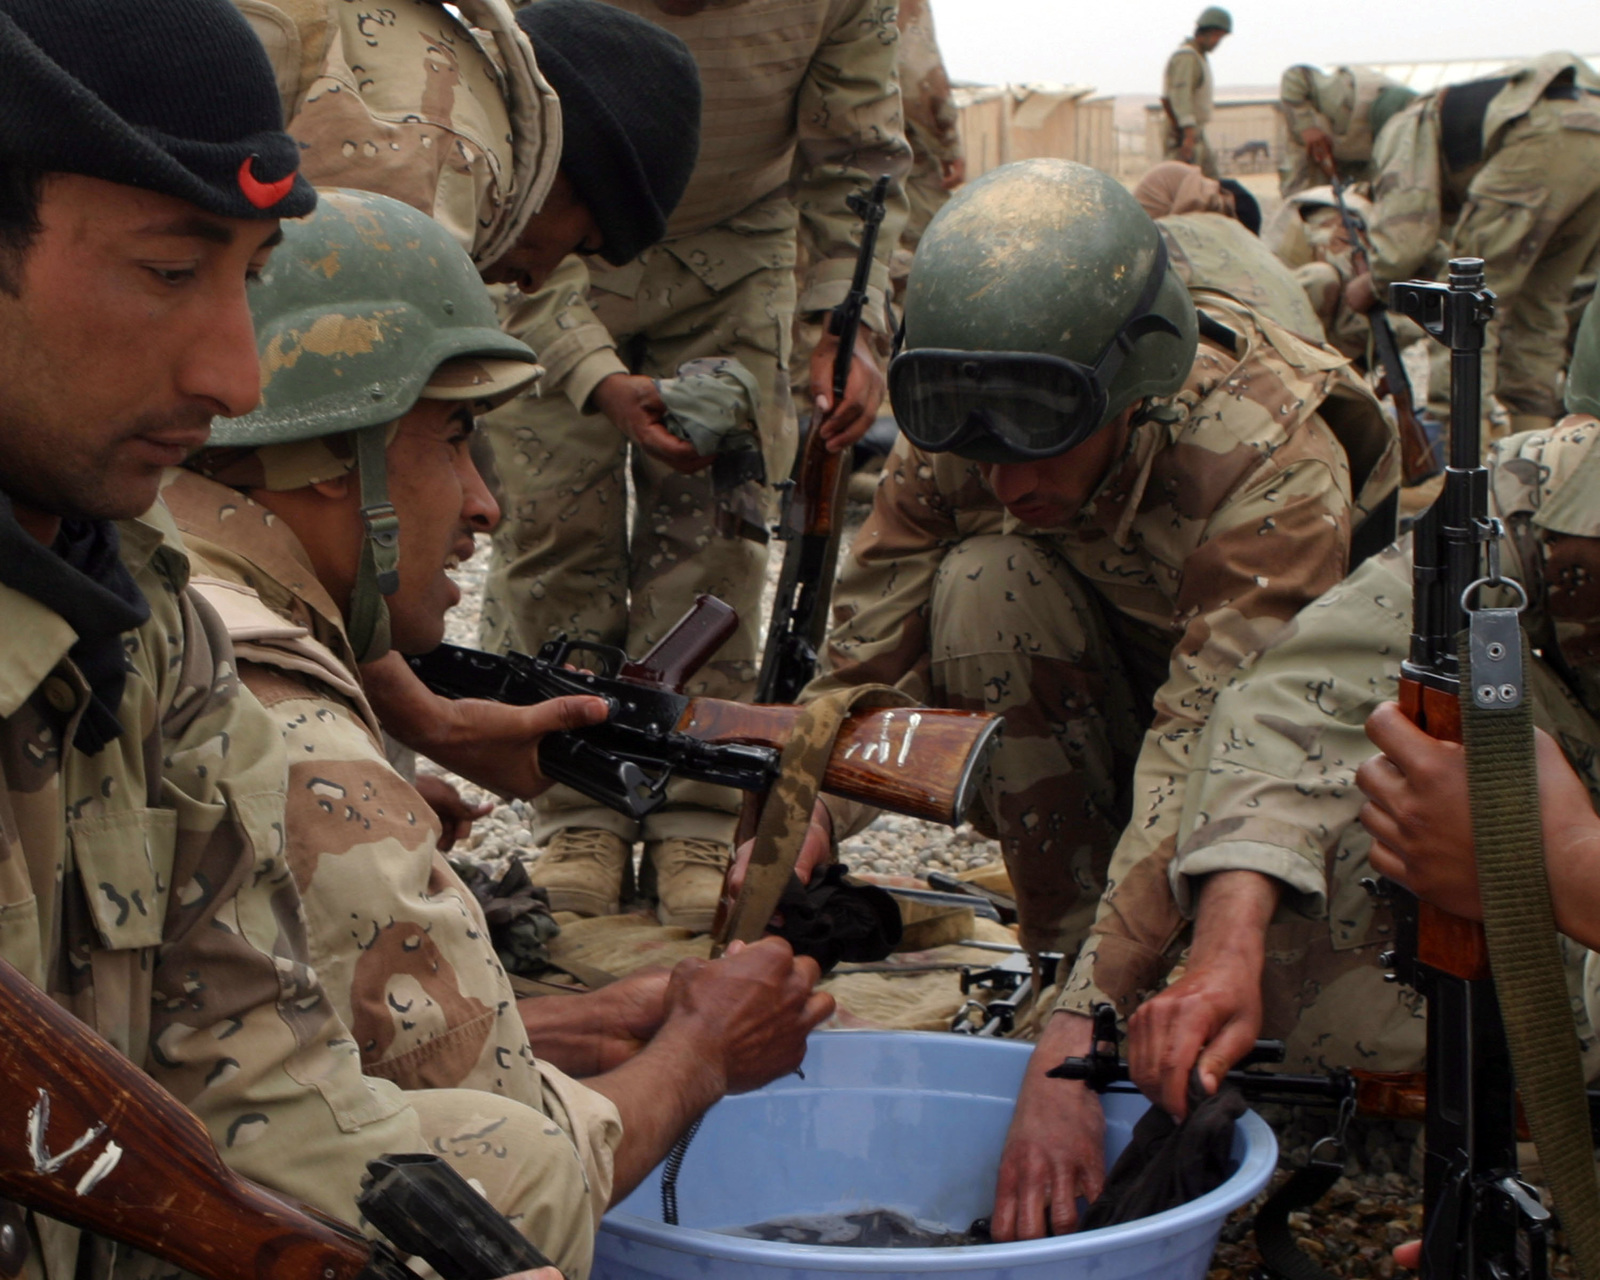 Iraqi Army Soldiers In The School Of Infantry (Soi) Clean Their Rifles  After Training At Cam Yasser On Al Asad Air Base, Iraq On March 24, 2007.  Soi Is A Ten Day